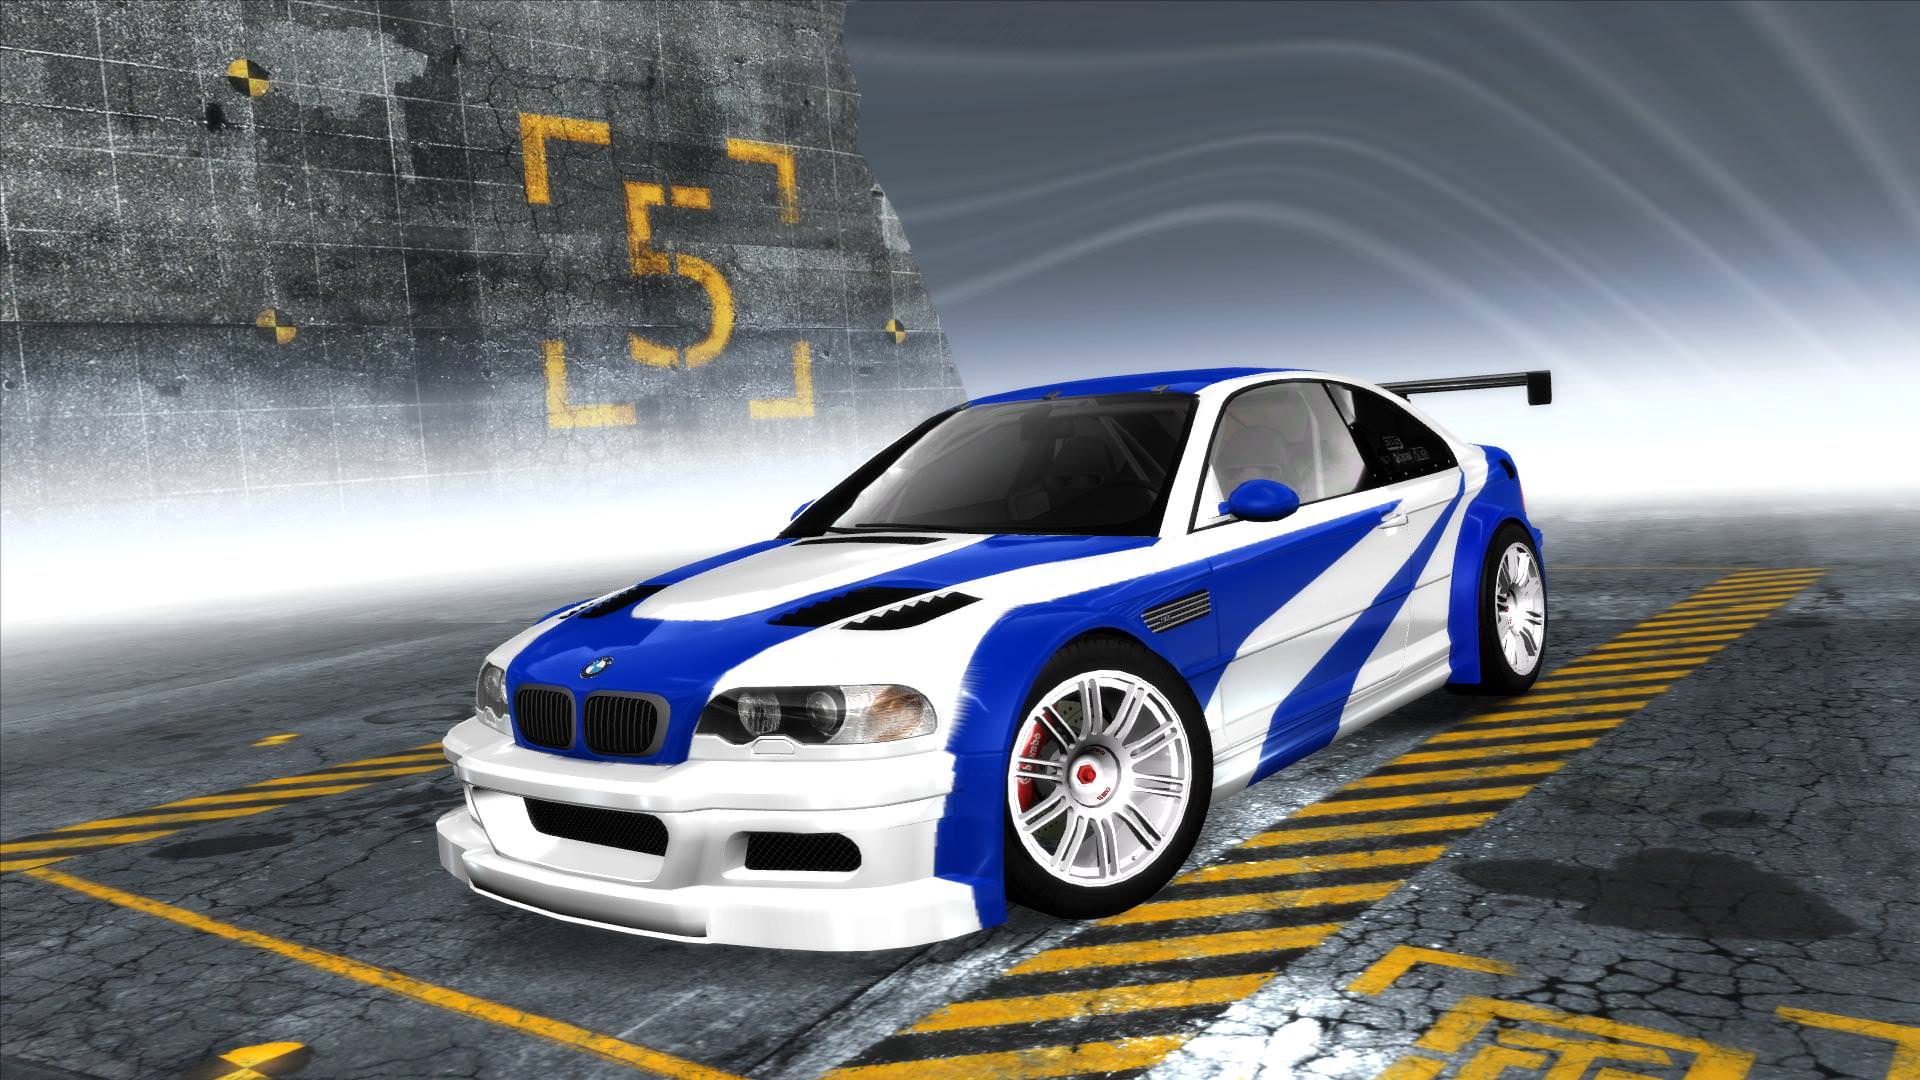 nfs most wanted 2005 bmw m3